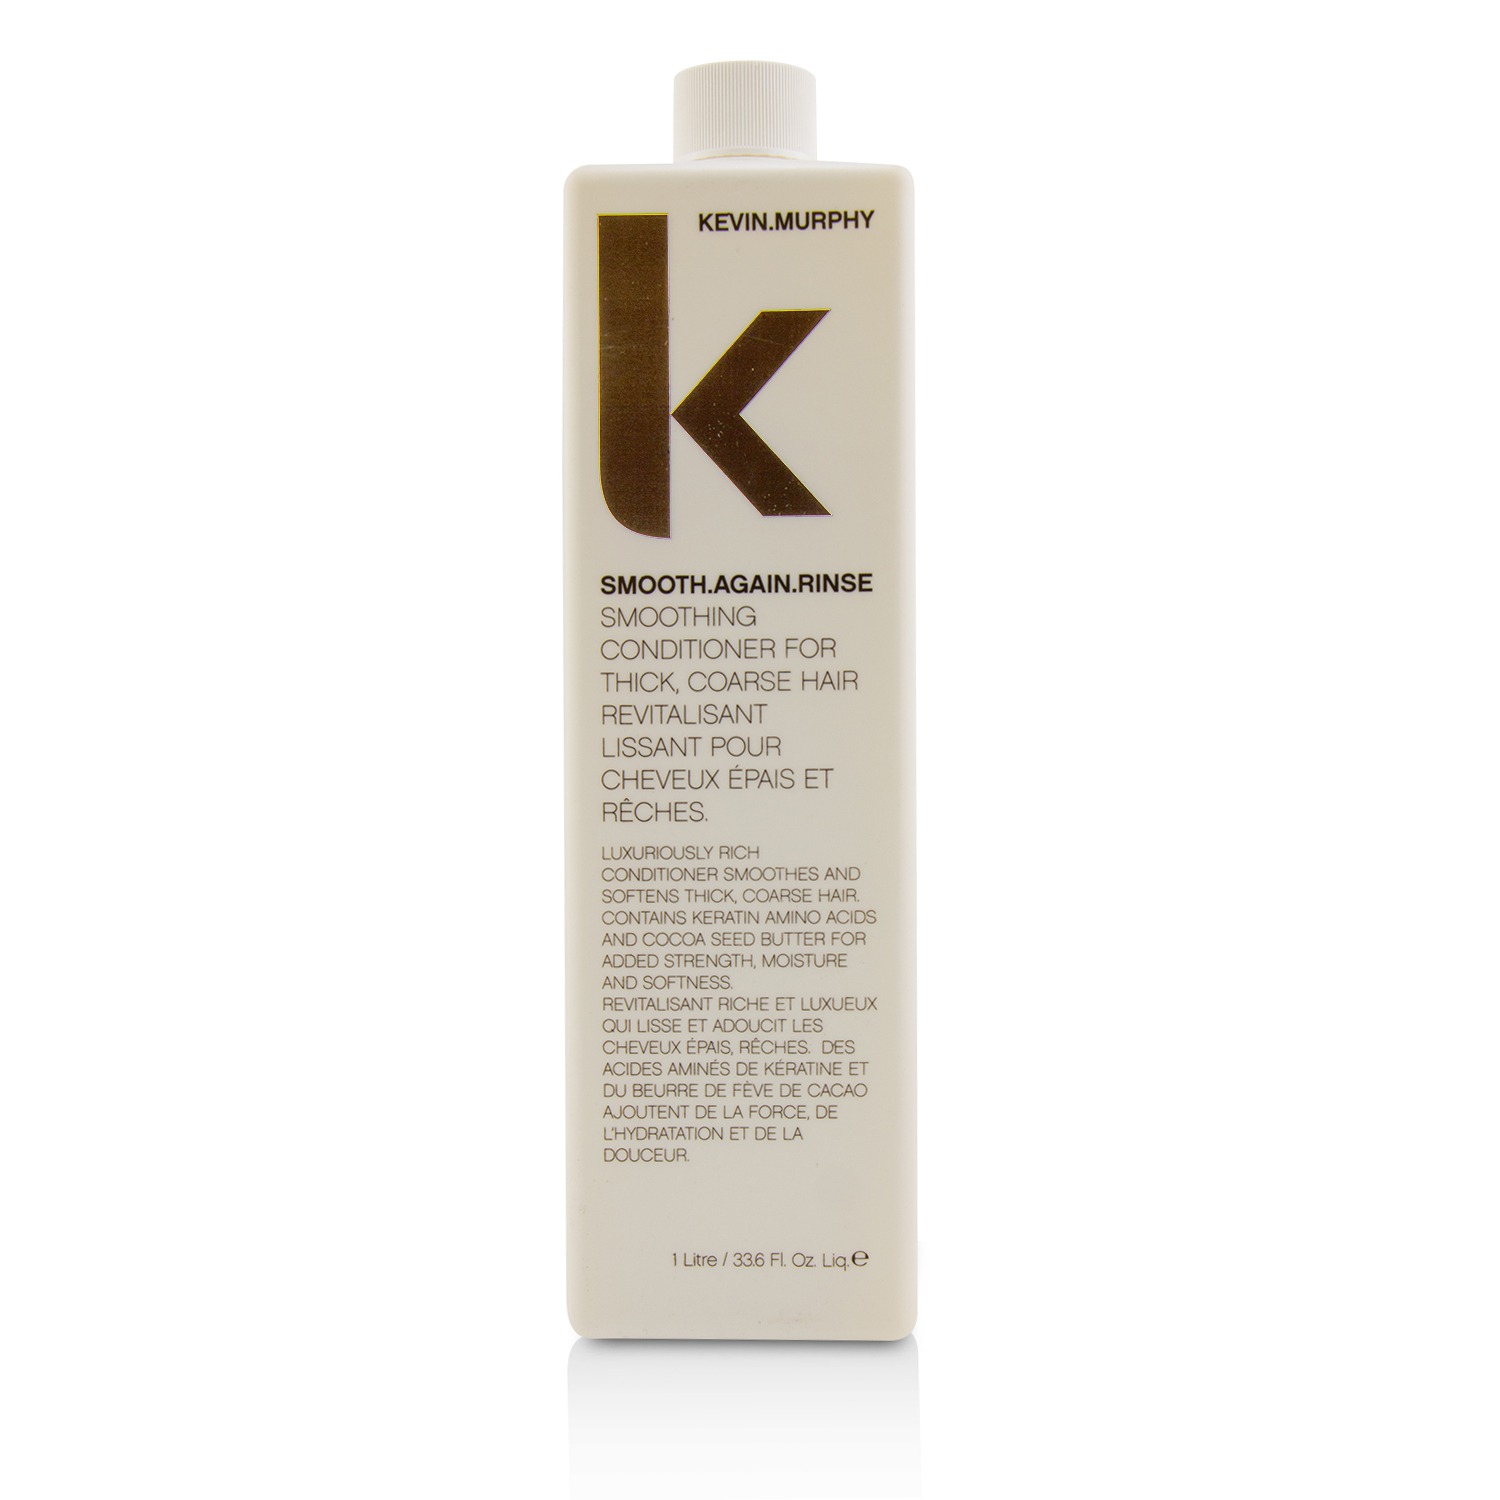 Smooth.Again.Rinse (Smoothing Conditioner - For Thick Coarse Hair) Kevin.Murphy Image